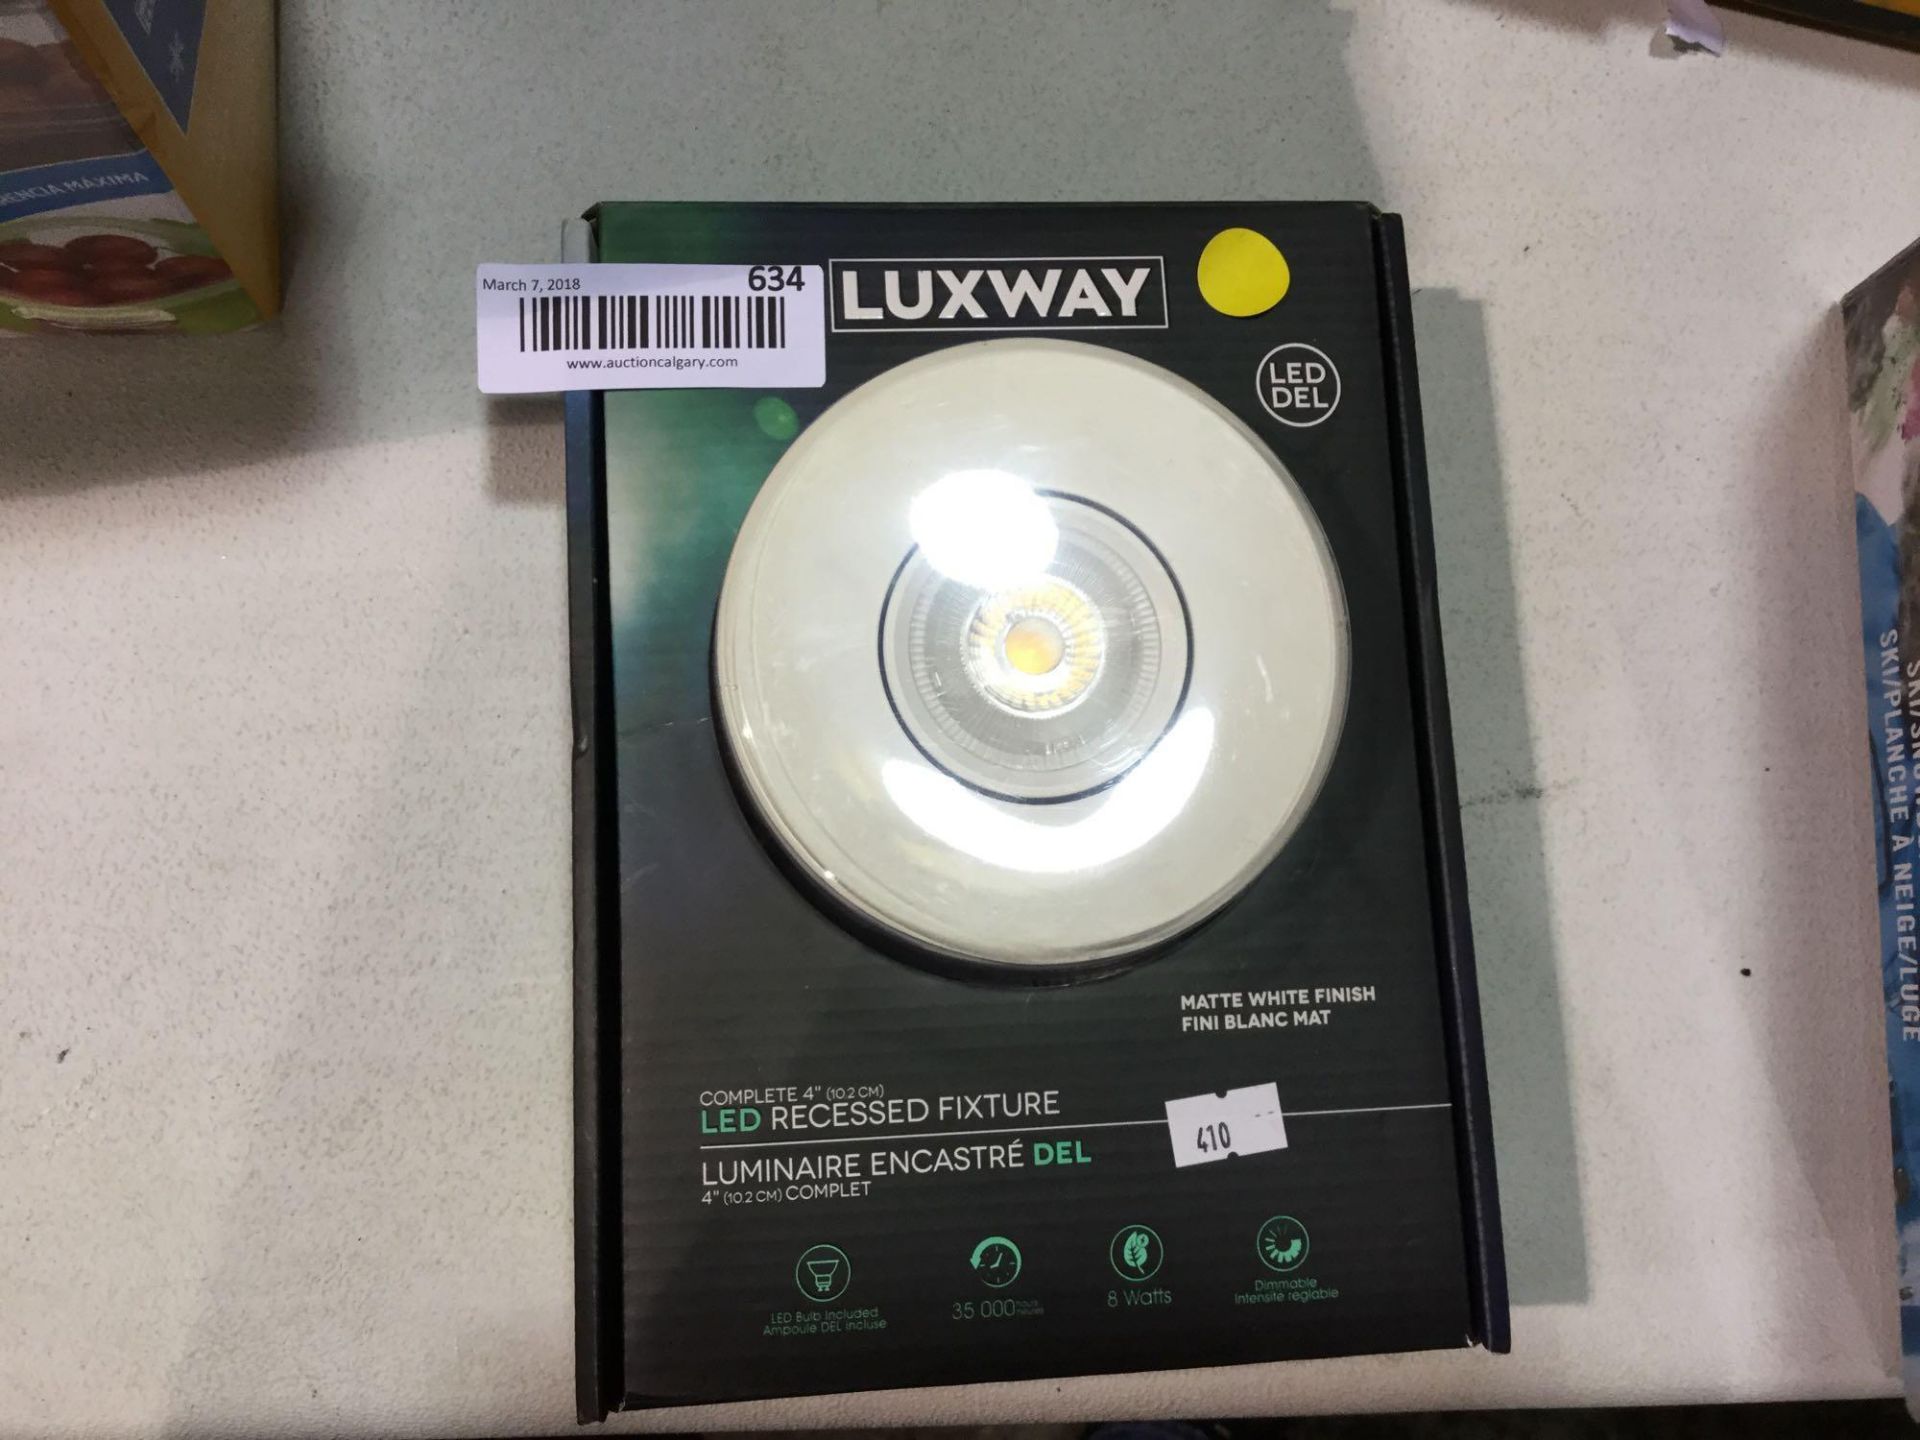 Luxway LED Recessed Fixture